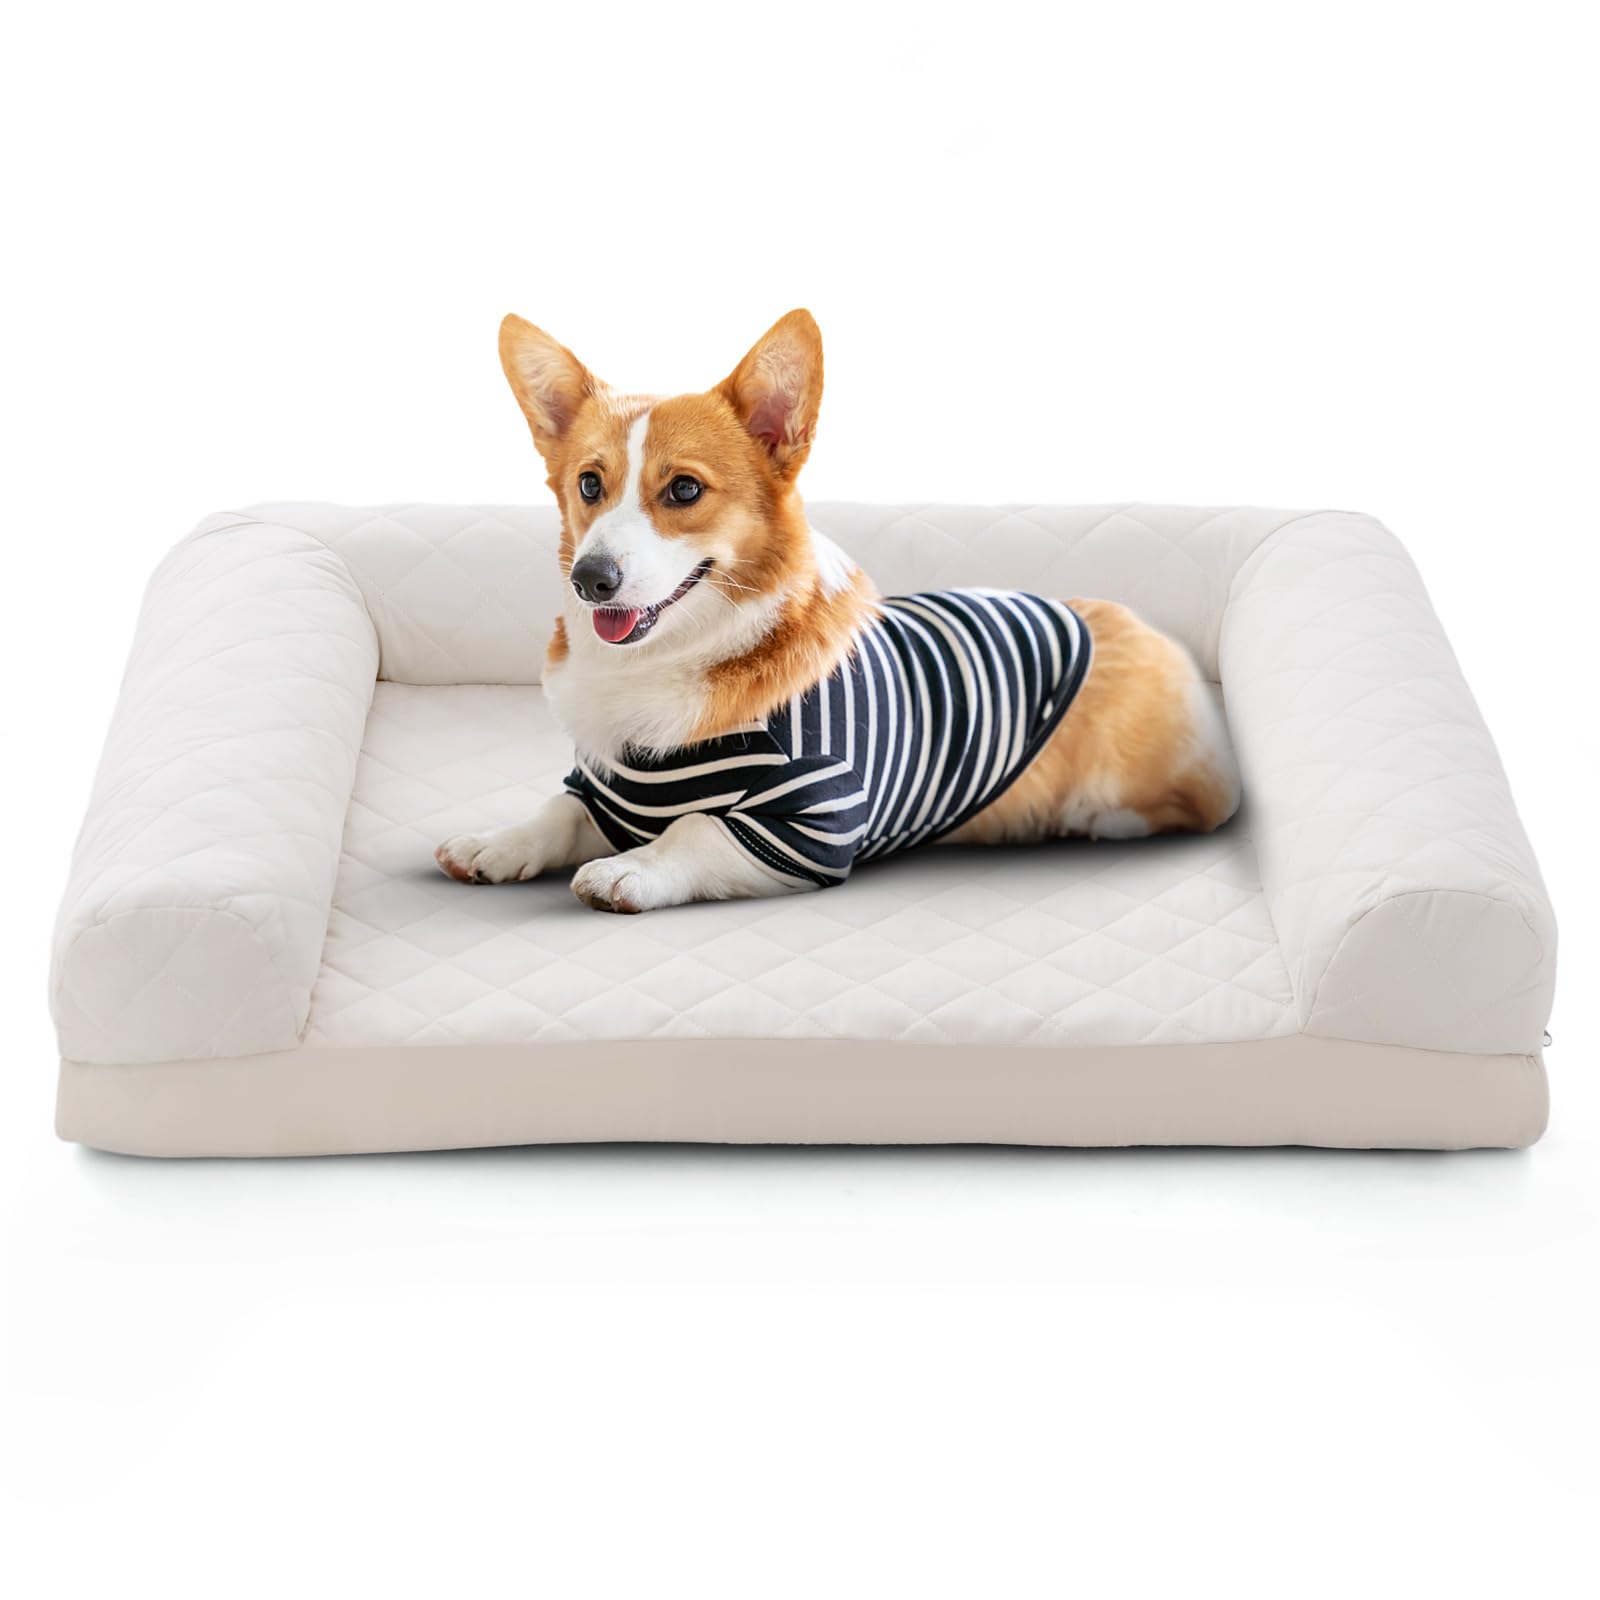 Giantex Orthopedic Dog Bed - Egg Crate Foam Dog Sofa Pet Bed with Washable Cover